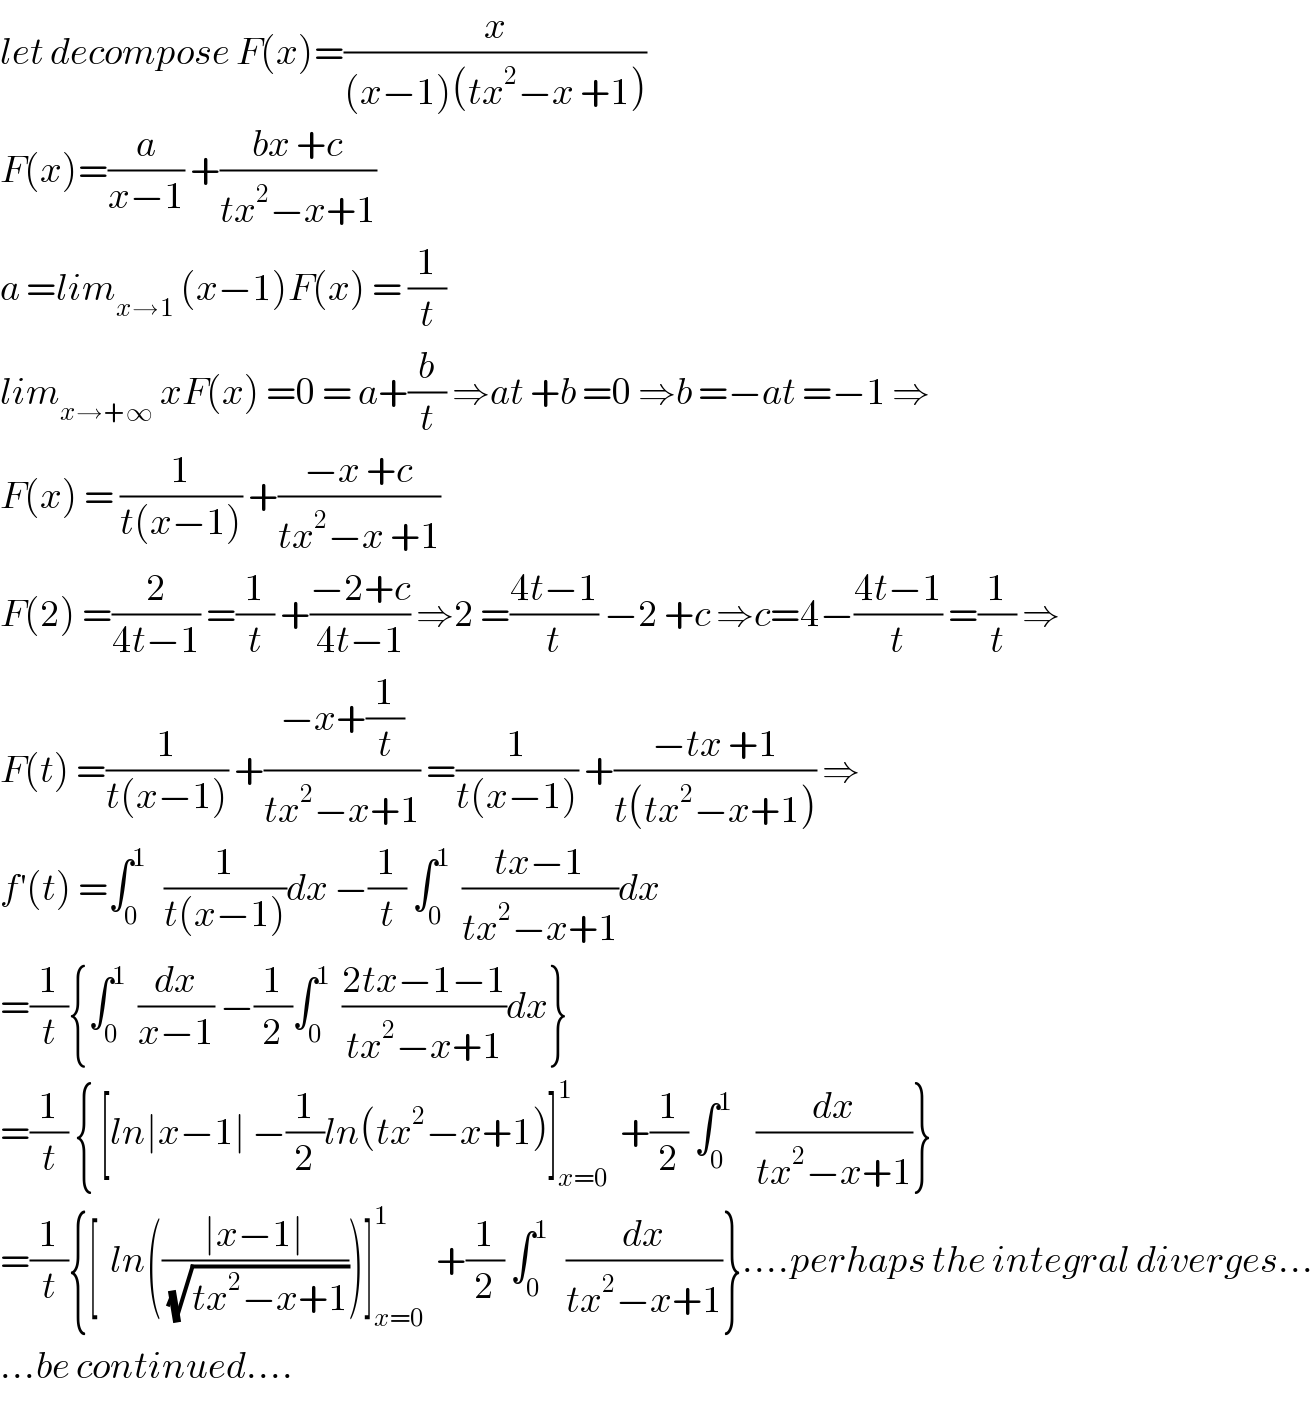 let decompose F(x)=(x/((x−1)(tx^2 −x +1)))  F(x)=(a/(x−1)) +((bx +c)/(tx^2 −x+1))  a =lim_(x→1)  (x−1)F(x) = (1/t)  lim_(x→+∞)  xF(x) =0 = a+(b/t) ⇒at +b =0 ⇒b =−at =−1 ⇒  F(x) = (1/(t(x−1))) +((−x +c)/(tx^2 −x +1))  F(2) =(2/(4t−1)) =(1/t) +((−2+c)/(4t−1)) ⇒2 =((4t−1)/t) −2 +c ⇒c=4−((4t−1)/t) =(1/t) ⇒  F(t) =(1/(t(x−1))) +((−x+(1/t))/(tx^2 −x+1)) =(1/(t(x−1))) +((−tx +1)/(t(tx^2 −x+1))) ⇒  f^′ (t) =∫_0 ^1    (1/(t(x−1)))dx −(1/t) ∫_0 ^1   ((tx−1)/(tx^2 −x+1))dx  =(1/t){∫_0 ^1   (dx/(x−1)) −(1/2)∫_0 ^1   ((2tx−1−1)/(tx^2 −x+1))dx}  =(1/t) { [ln∣x−1∣ −(1/2)ln(tx^2 −x+1)]_(x=0) ^1   +(1/2) ∫_0 ^1     (dx/(tx^2 −x+1))}  =(1/t){[  ln(((∣x−1∣)/(√(tx^2 −x+1))))]_(x=0) ^1   +(1/2) ∫_0 ^1    (dx/(tx^2 −x+1))}....perhaps the integral diverges...  ...be continued....  